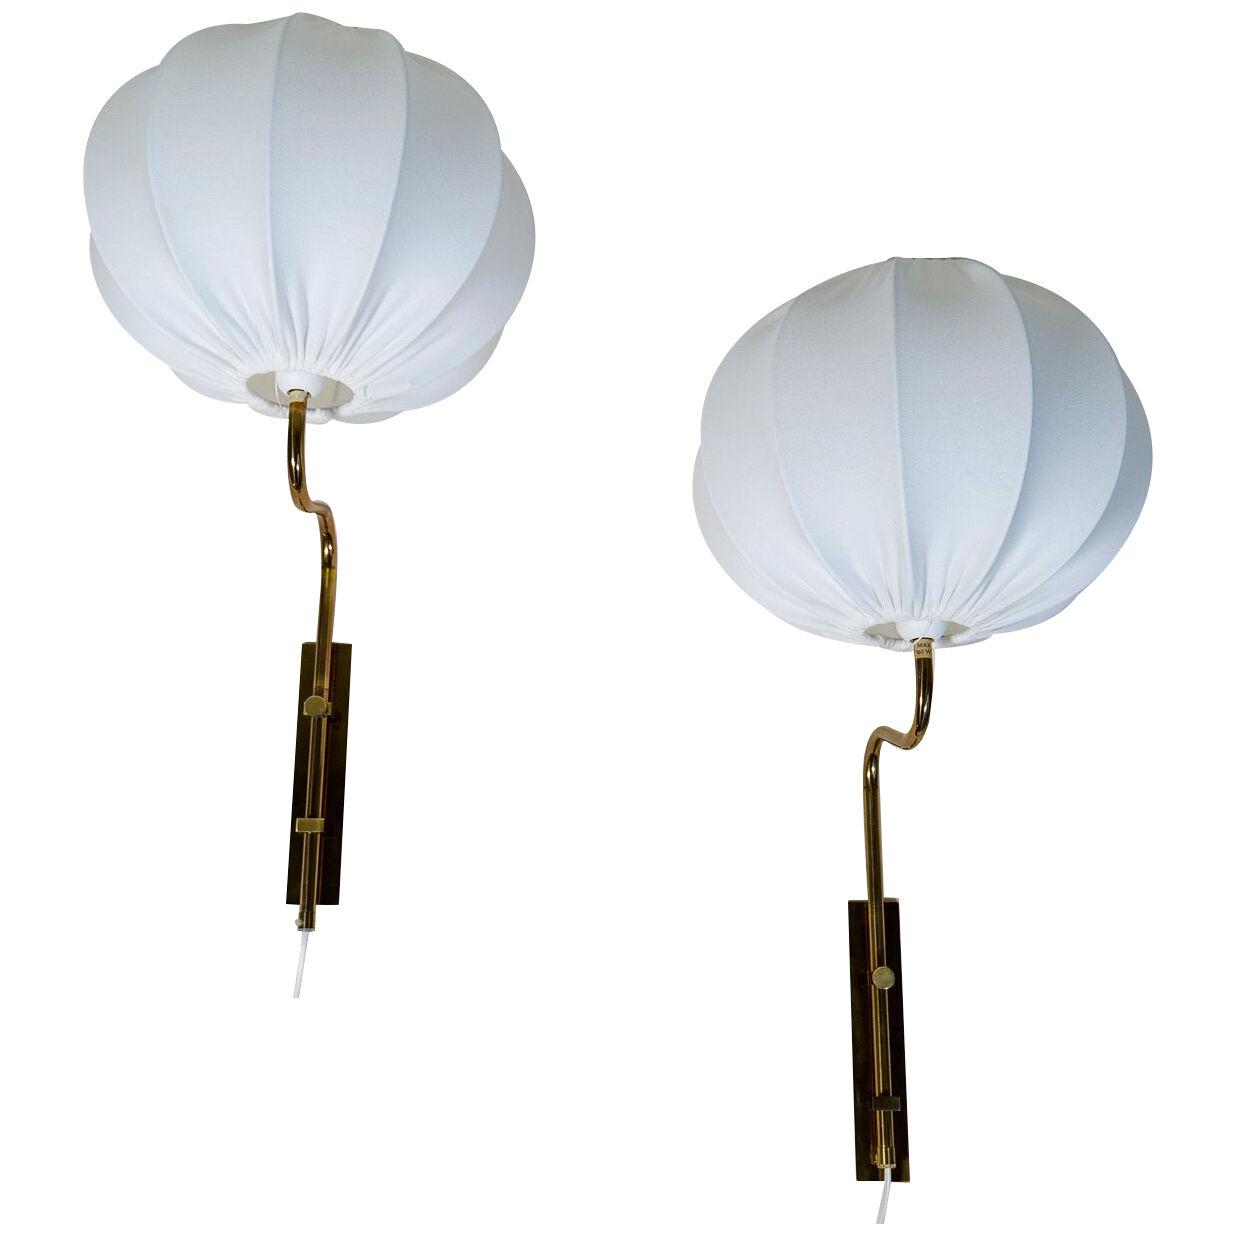 Midcentury Brass Wall Lights Bergboms with Cotton shades, Sweden, 1970s